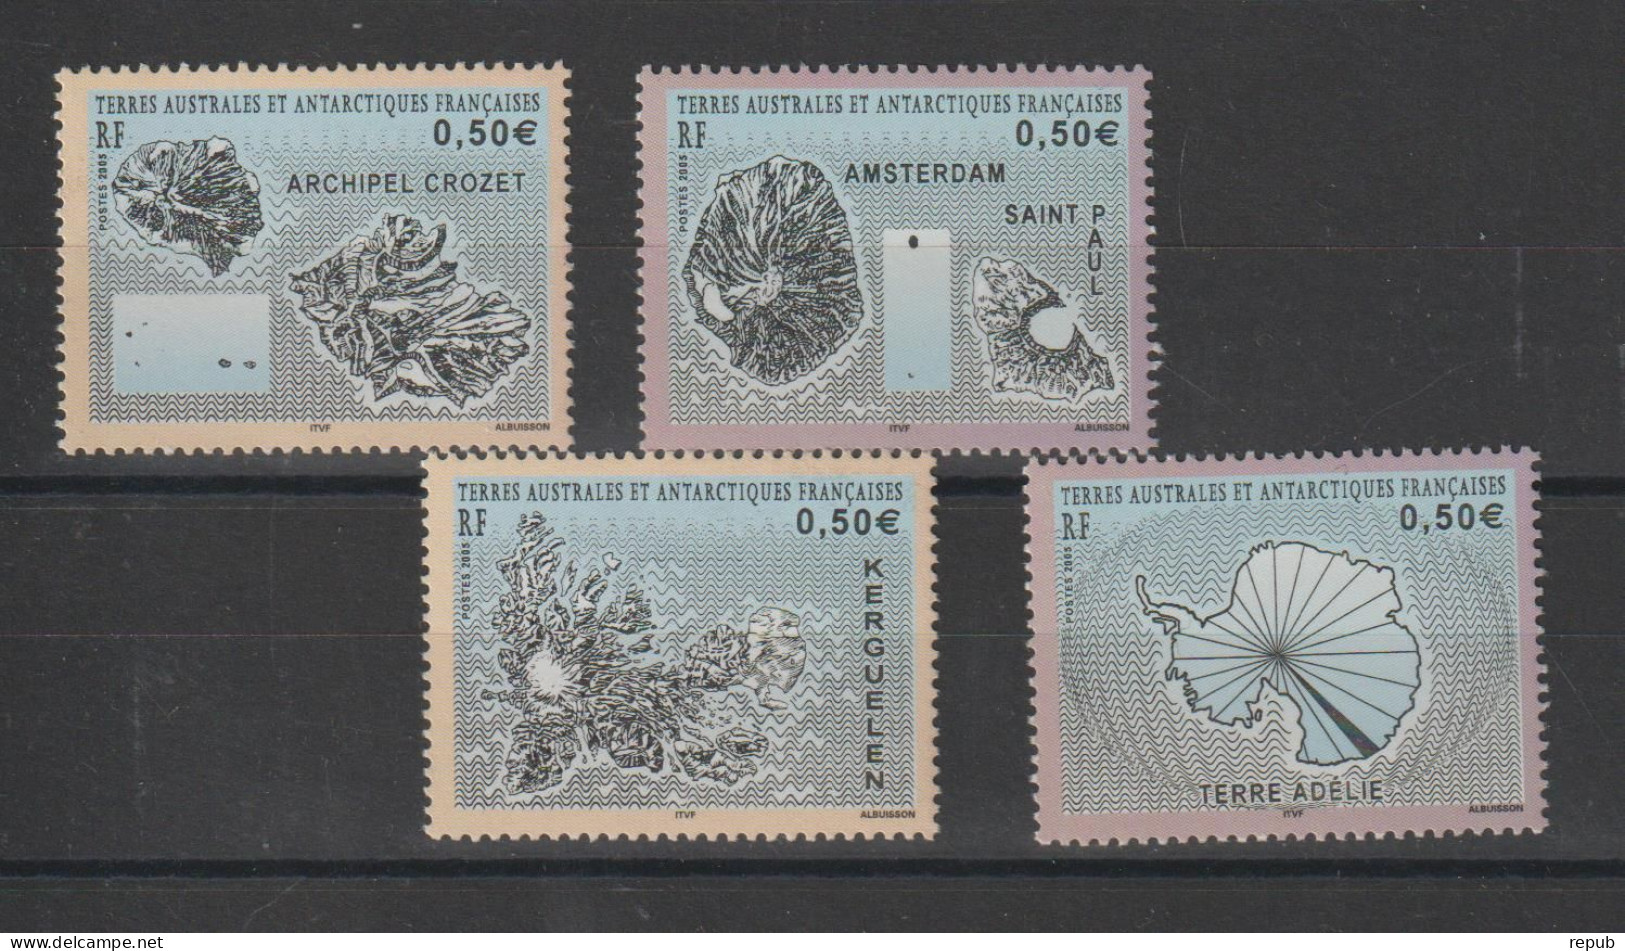 TAAF 2005 Timbres Issus Du BF 13, 431-434, 4 Val ** MNH - Nuovi